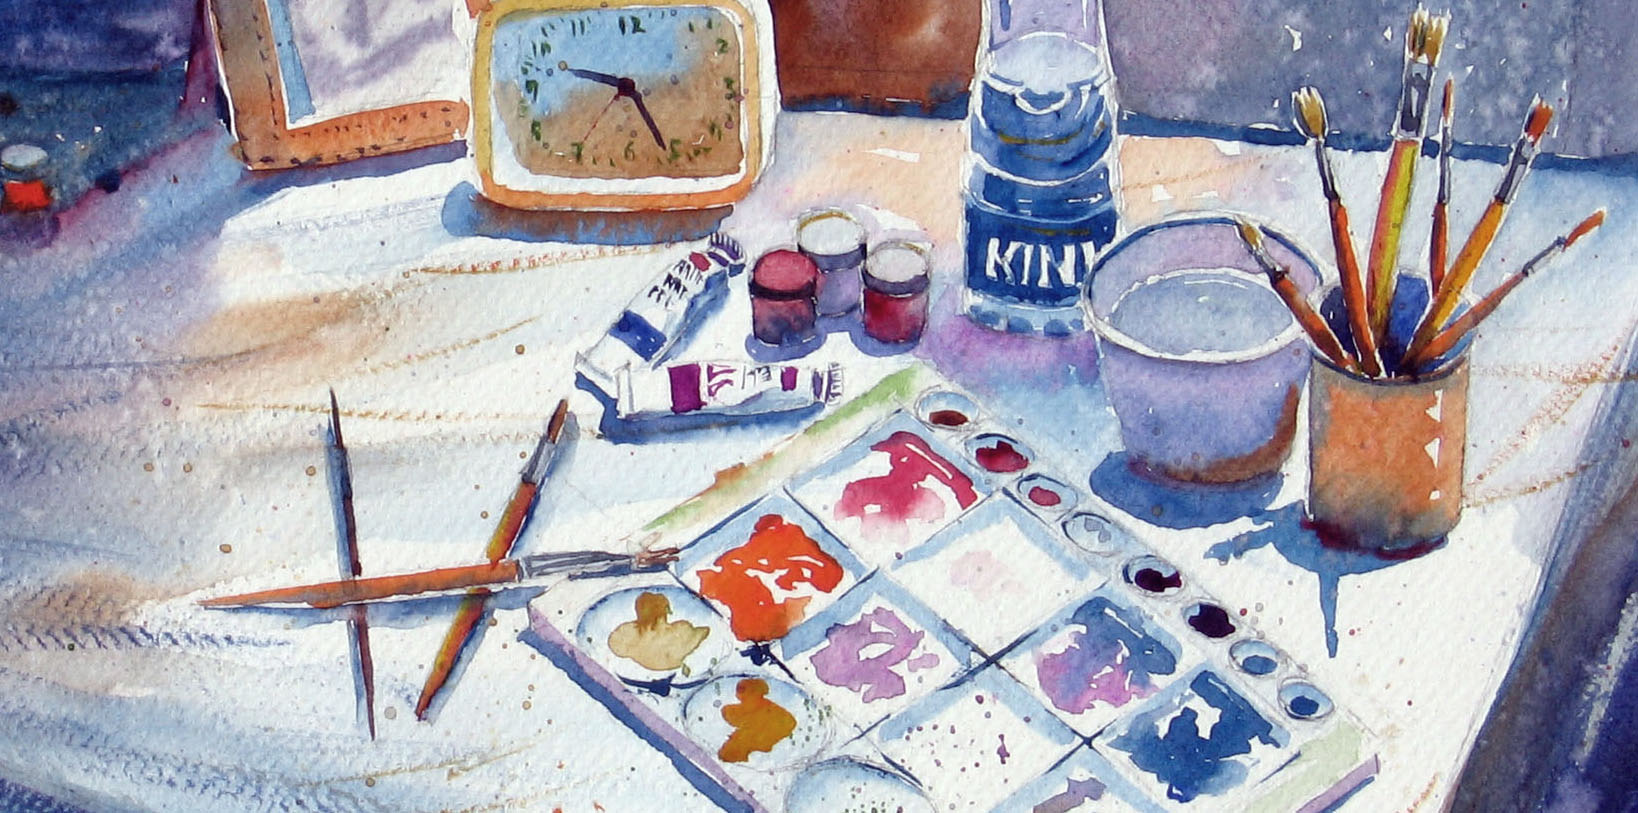 Basic Watercolor Painting Supplies for Beginners